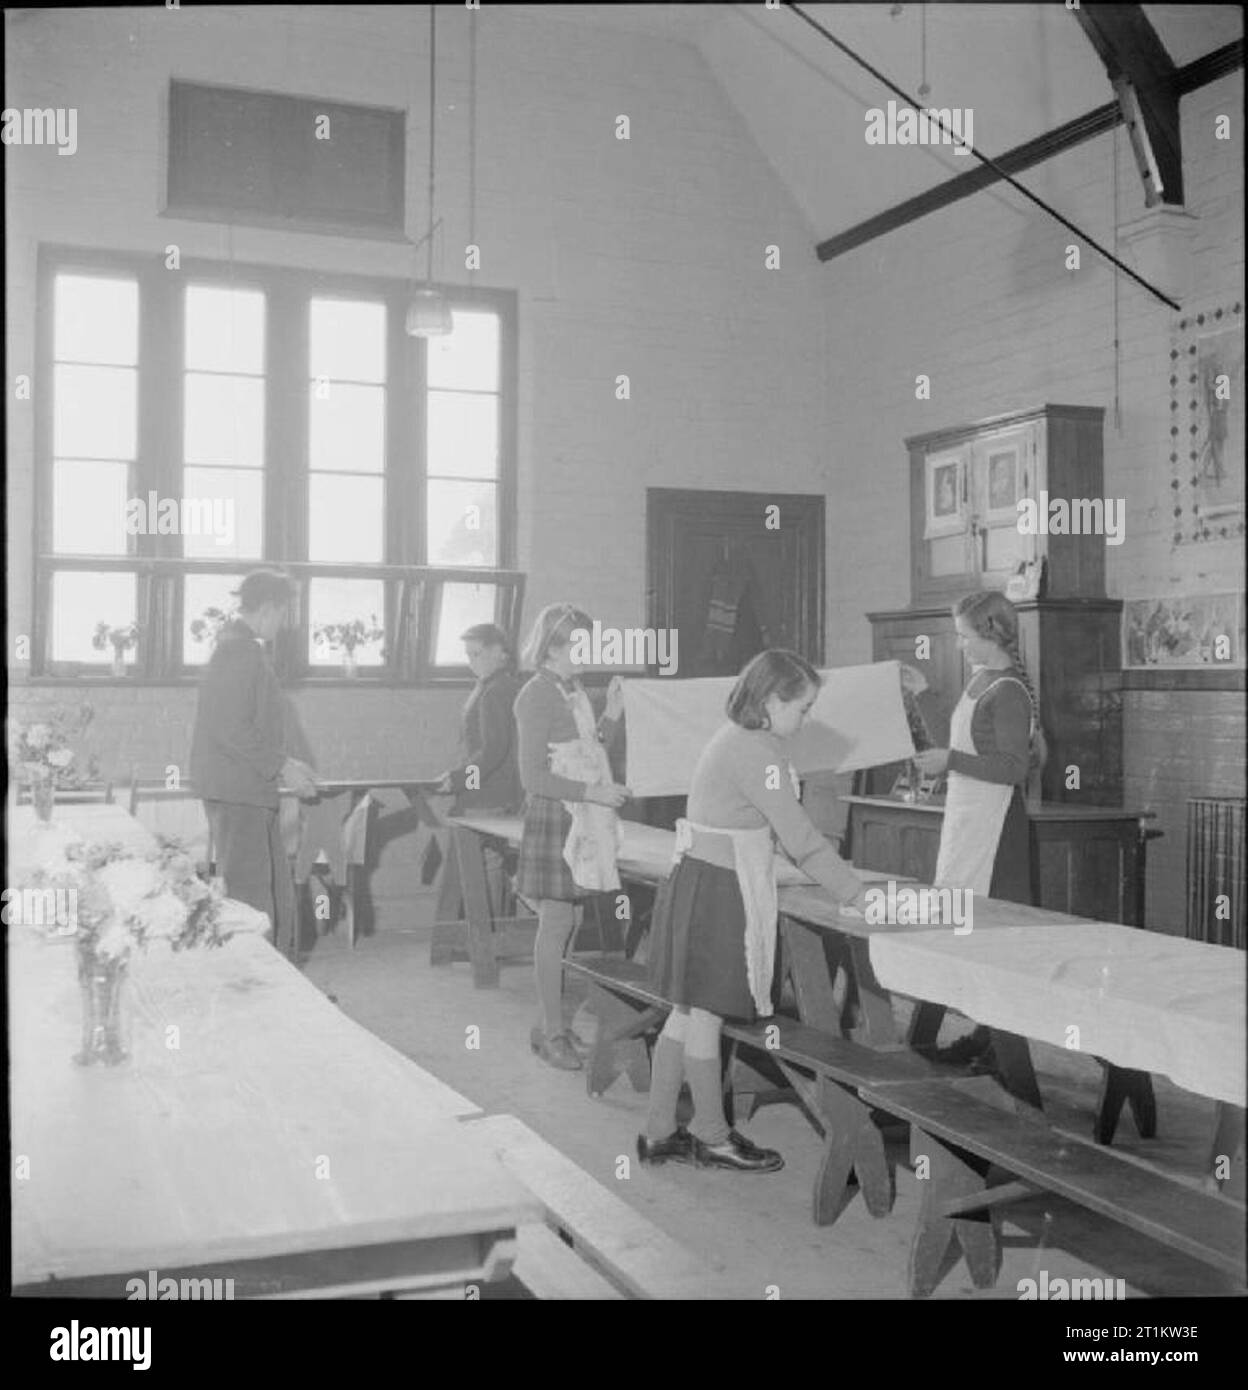 Village Gardens Feed Schoolchildren- Food Production at Knighton-on-teme, Worcestershire, England, UK, 1943 After lunch at the village school in Knighton-on-Teme, the dining room is cleared and returned to its normal state as a classroom. Boys move the benches and desks whilst girls fold up the table cloths. Stock Photo